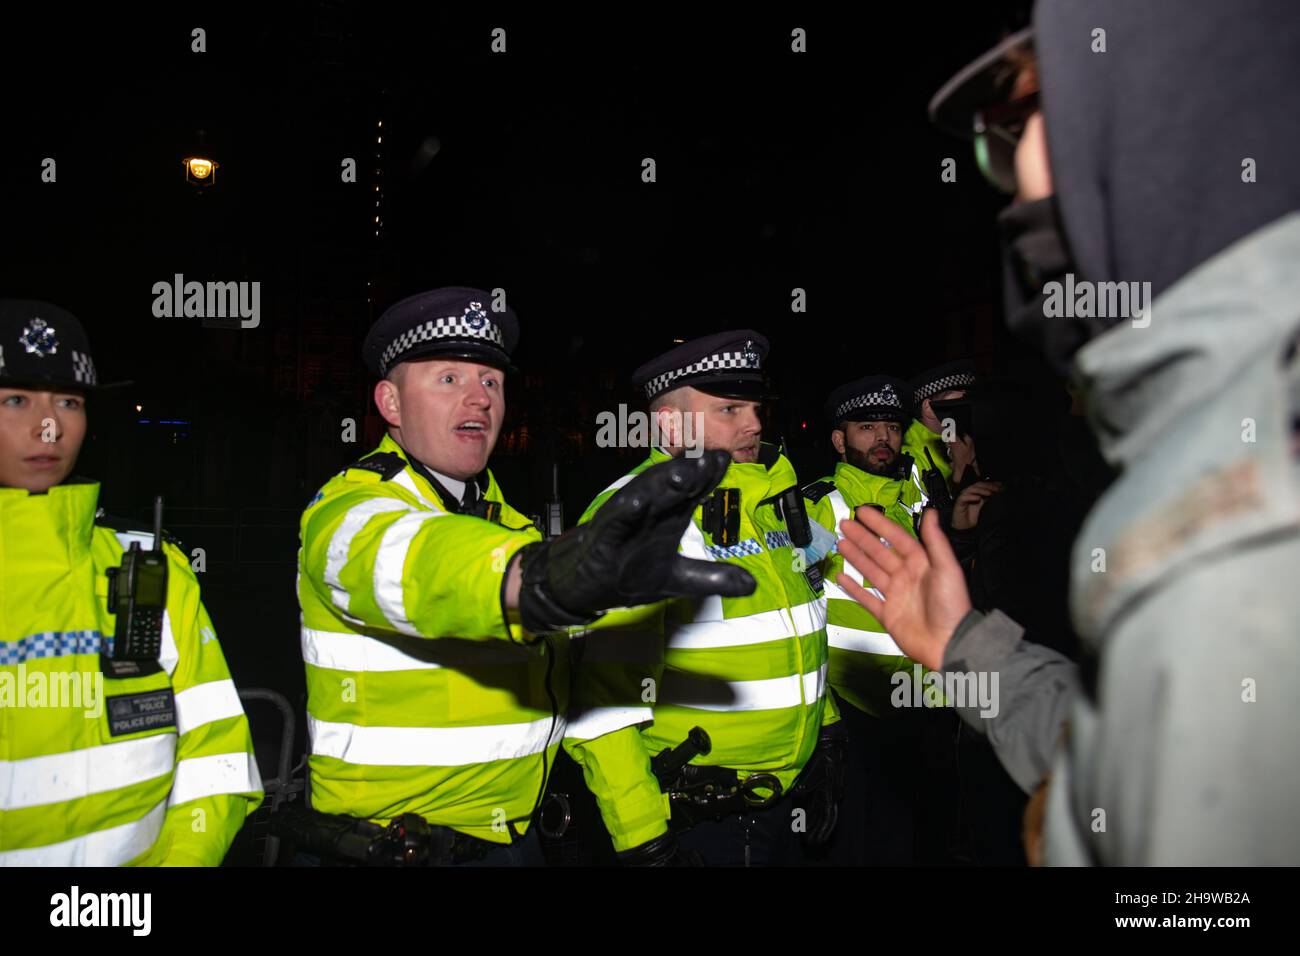 London, England, UK 8th December 2021 Hundreds of protesters gather at Parliament Square in opposition to the Police, Crime, Sentencing and Courts Bill with heated exchanges taking place between the police and protesters as the night drew in. Credit: Denise Laura Baker/Alamy Live News Stock Photo